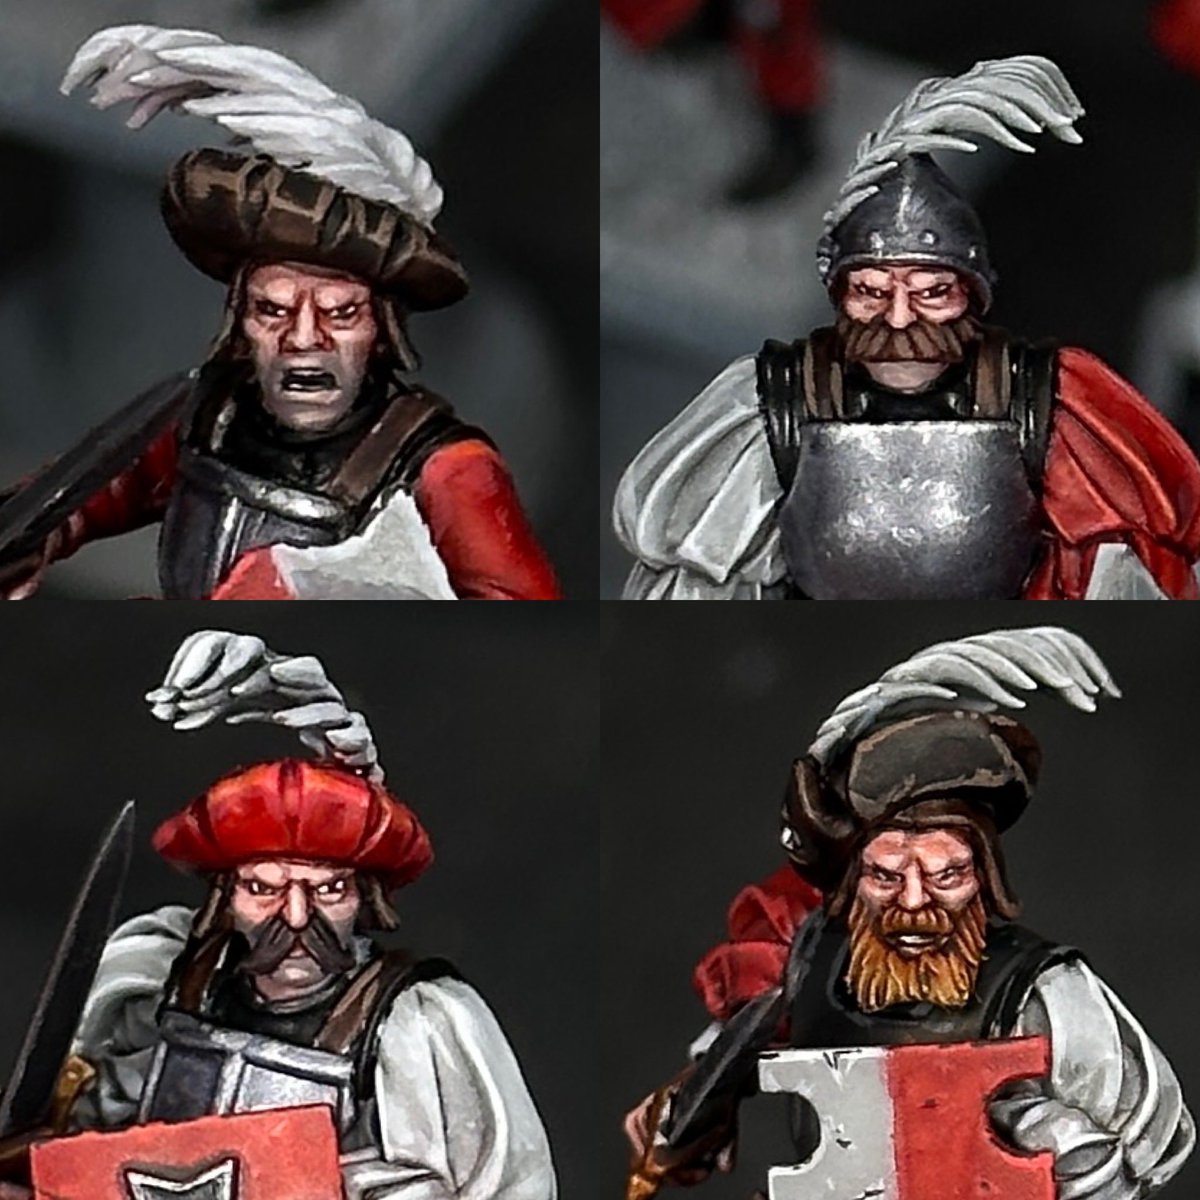 Faces of the Empire! Got some flesh work done on Swordsmen tonight. Printed on @3dUniformation GKtwo. Painted with @thearmypainter Warpaints Fanatic Line. #GKtwo #Uniformation3D #3dprinted #resin #warhammertheoldworld #oldworld #WHFB #empireofman #warpaintsfanatic